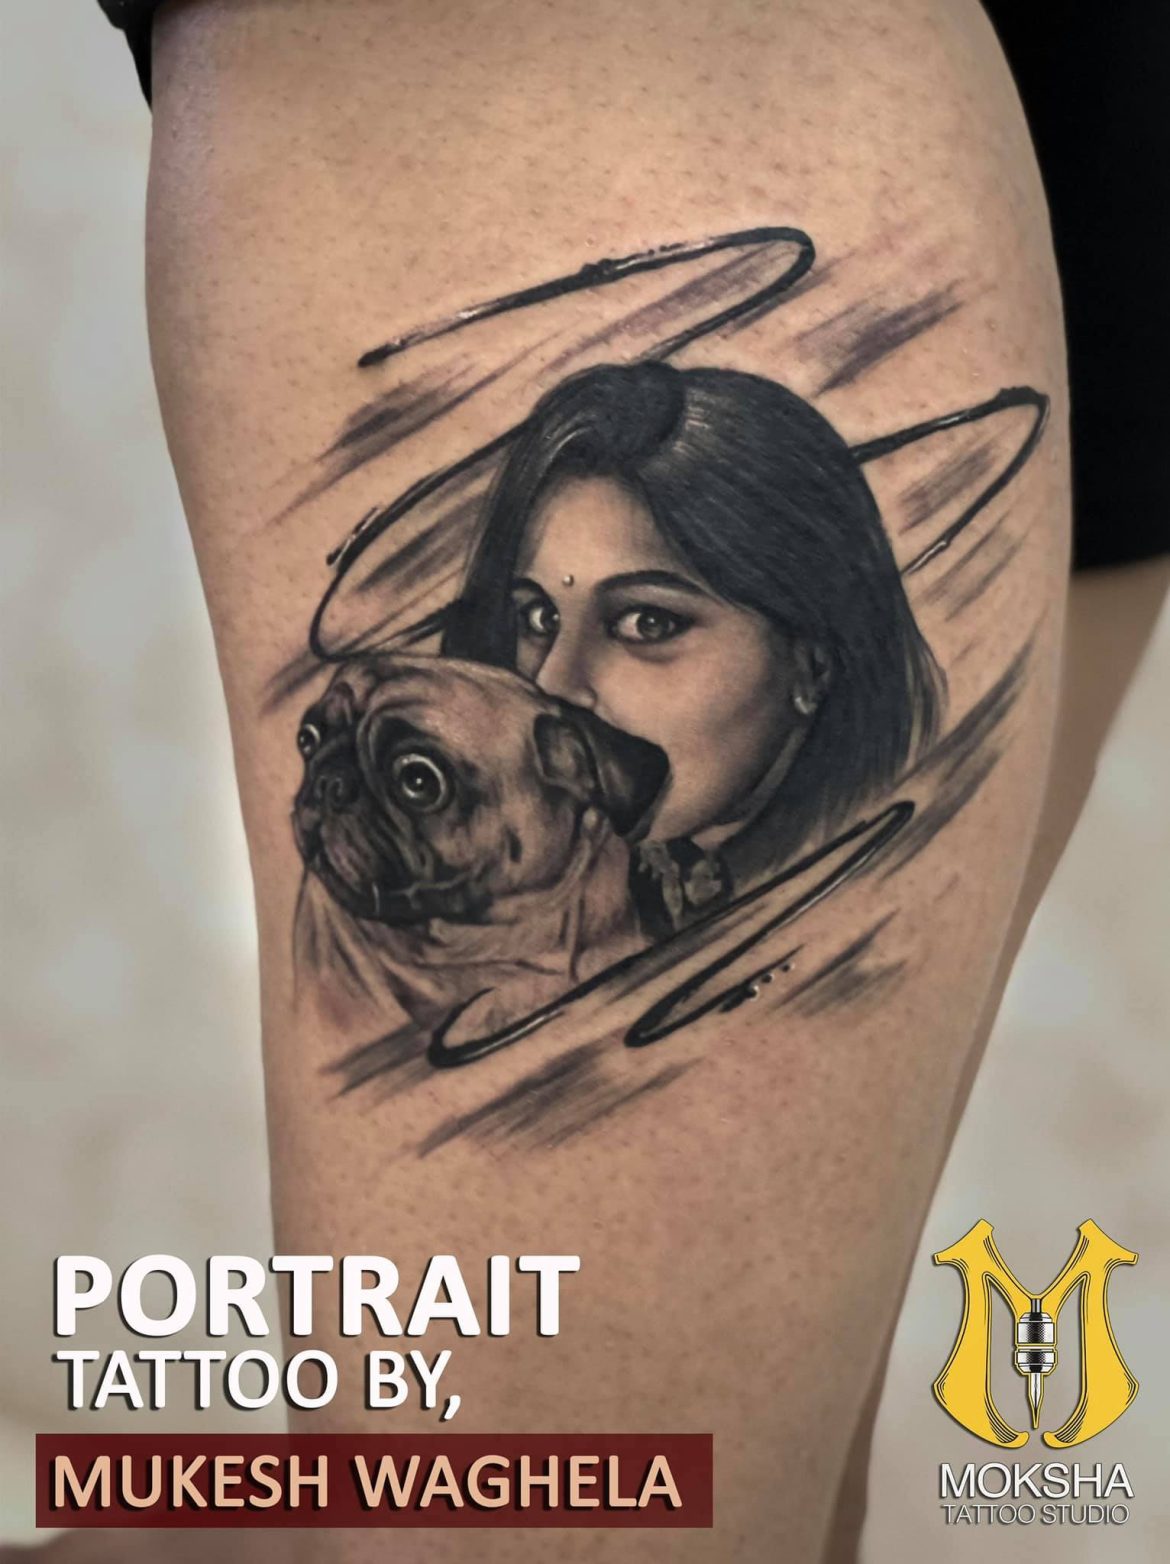 ISO Hyper Realism Tattoo Artist!! I'm looking for the best of the best!  Examples of what I consider the “best” are pictures posted. If they aren't  at this level or better I'm